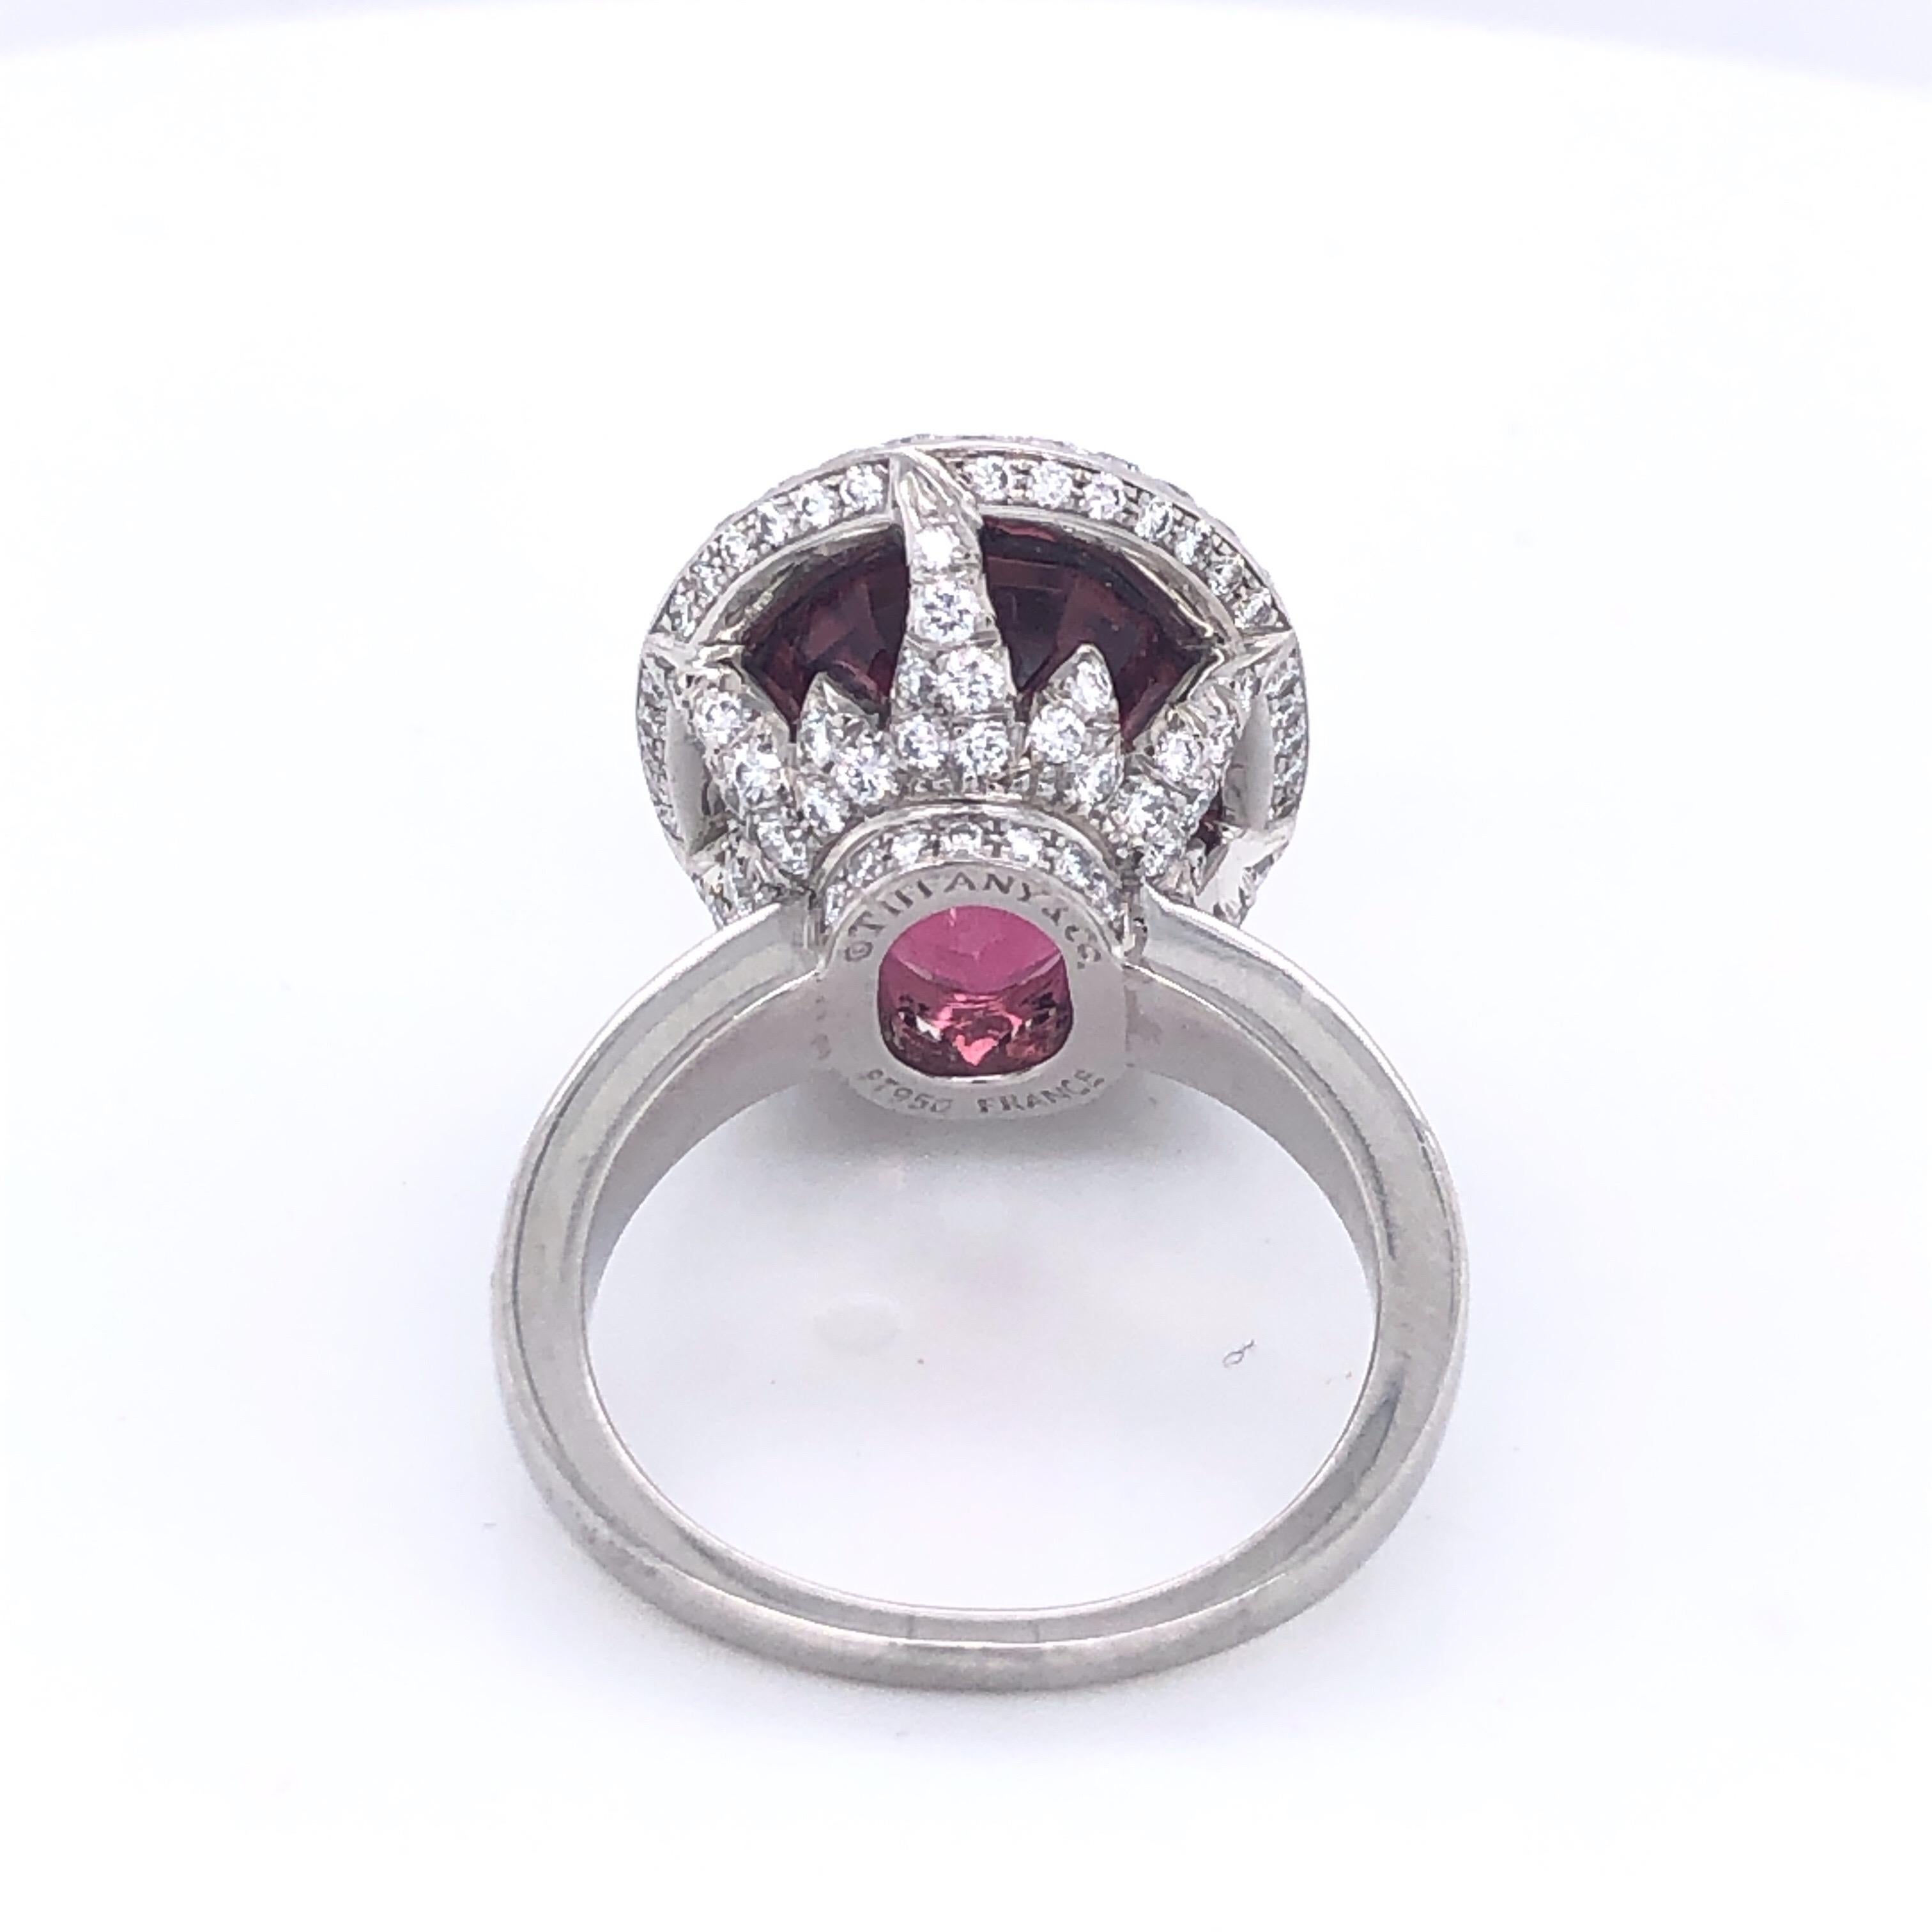 This beautiful Tiffany and Company Pink Tourmaline and Diamond Ring is sure to satisfy the pink lover!  In spectacular shape this ring sports a faceted 12 Carat Pink Tourmaline set in two carats of diamonds.  The back of the ring and it's intricate